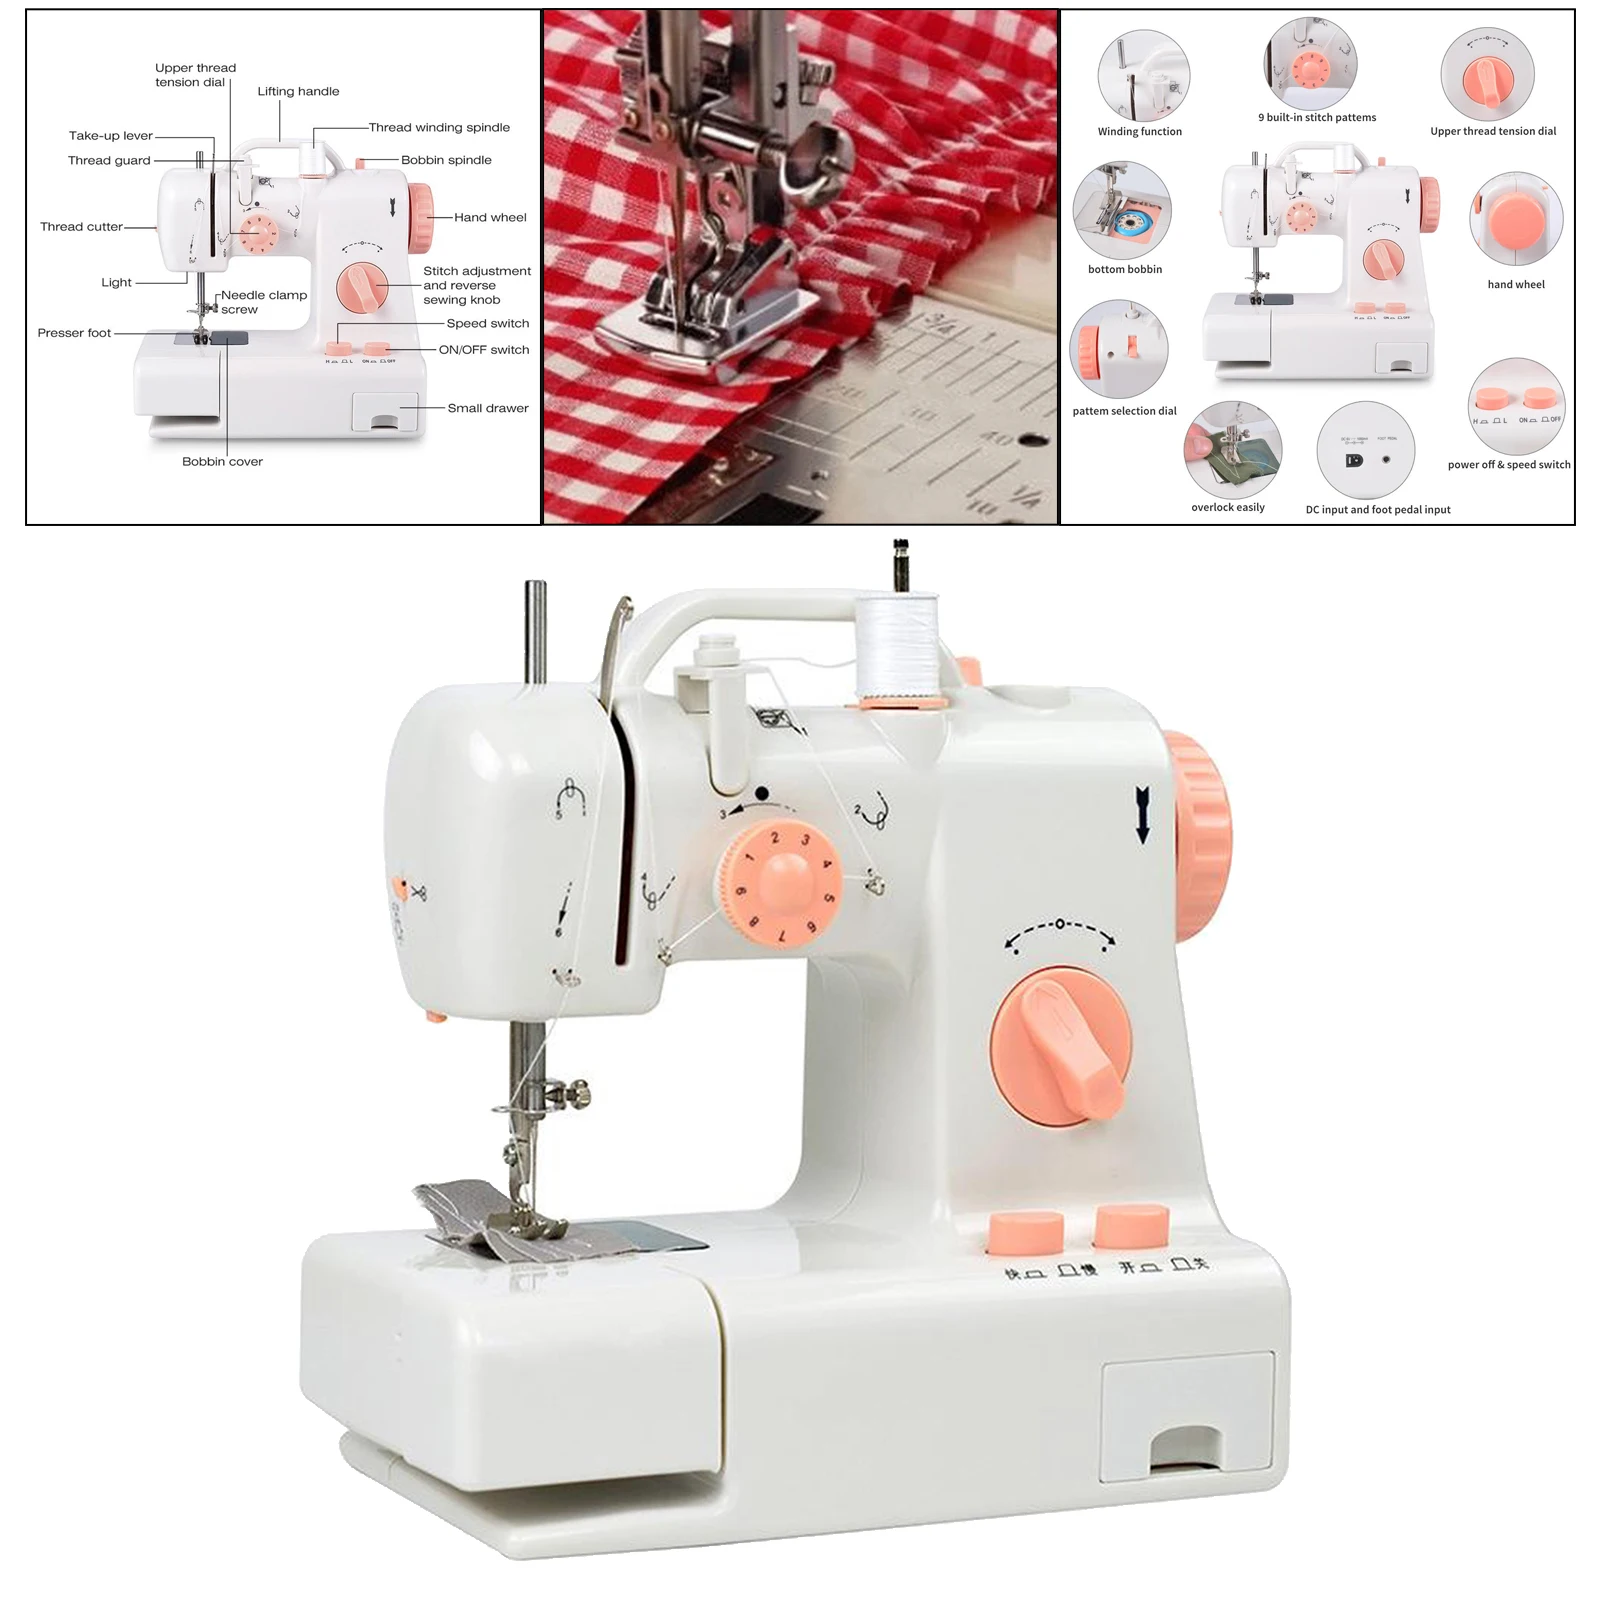 Mini Electric Sewing Machine Double Speed Adjustment With Light Household Portable Needlework Handheld Sewing Machine